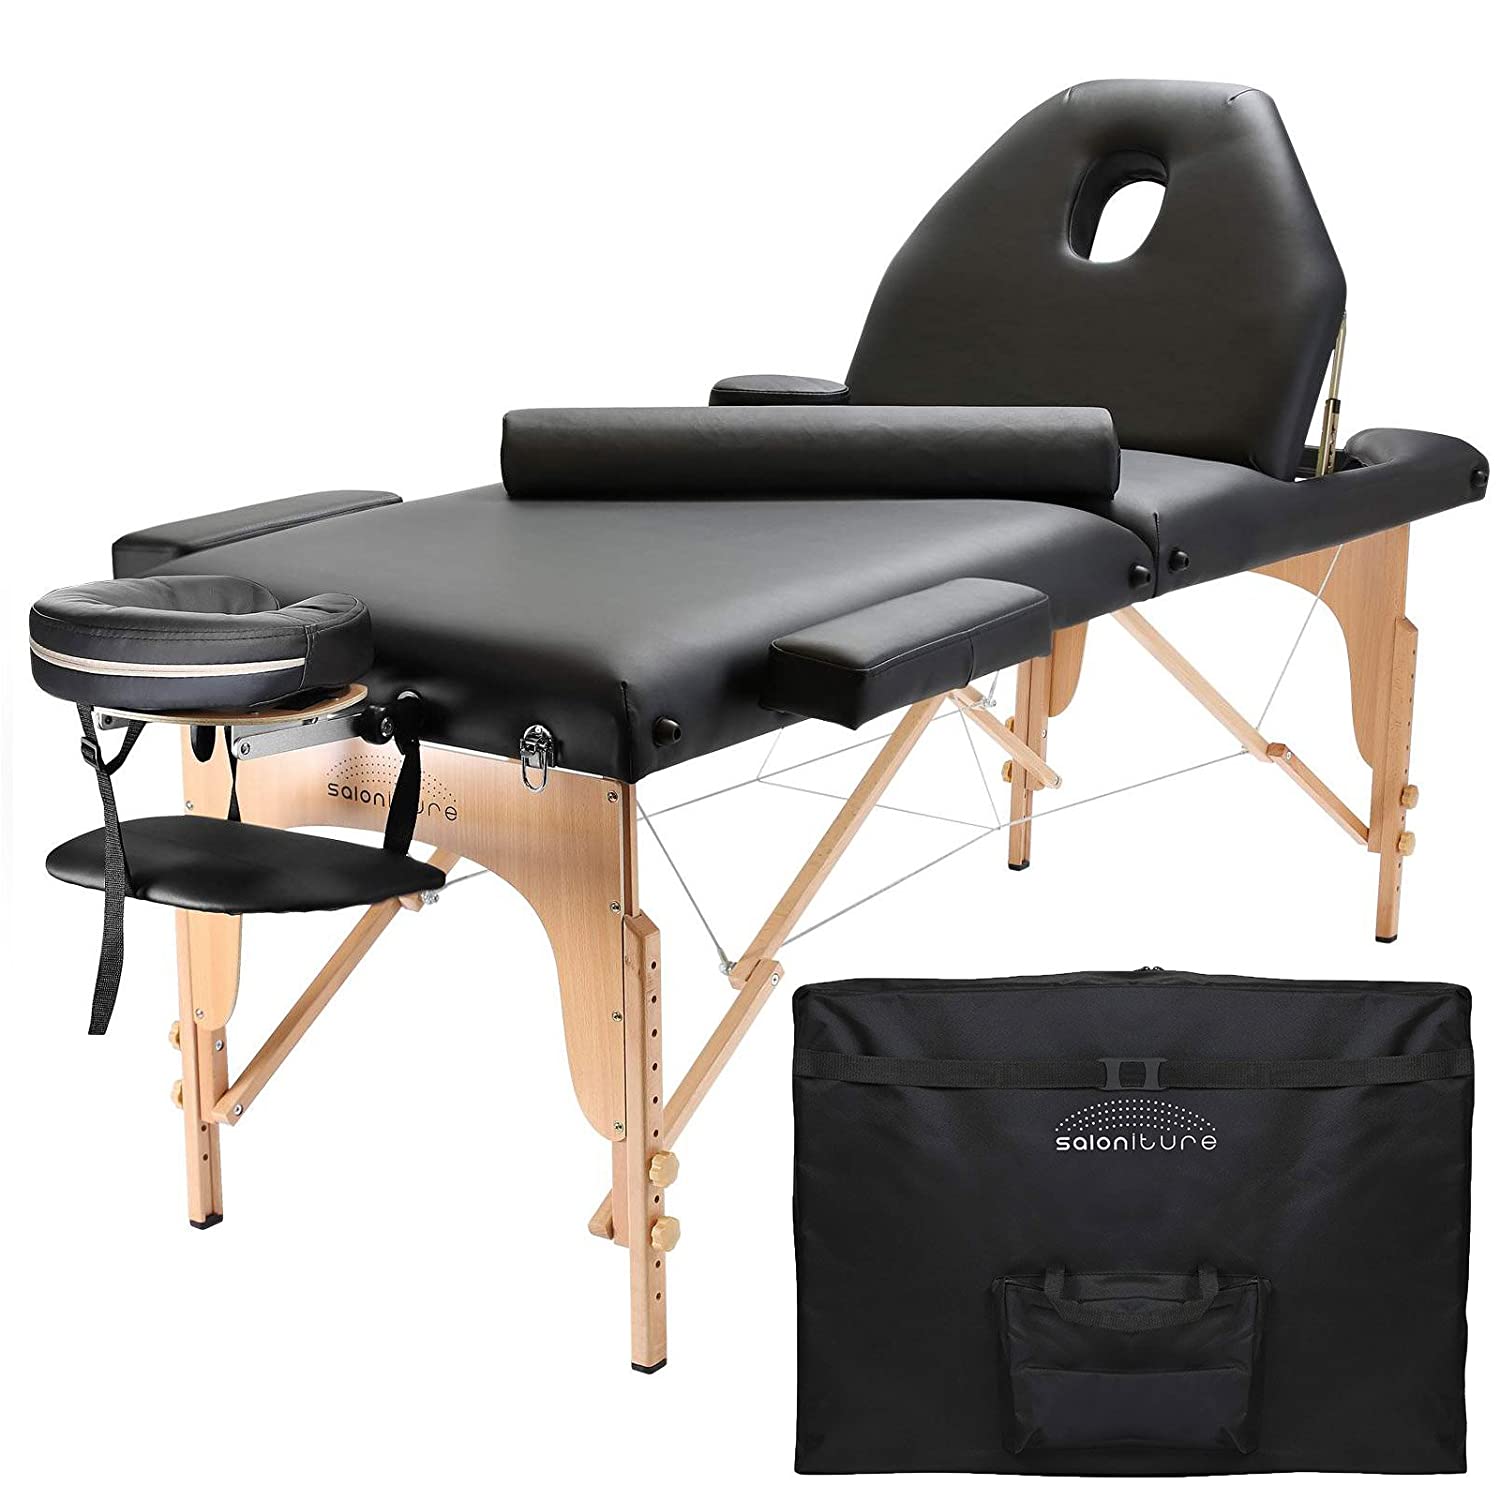 Review of Saloniture Professional Portable Massage Table with Backrest